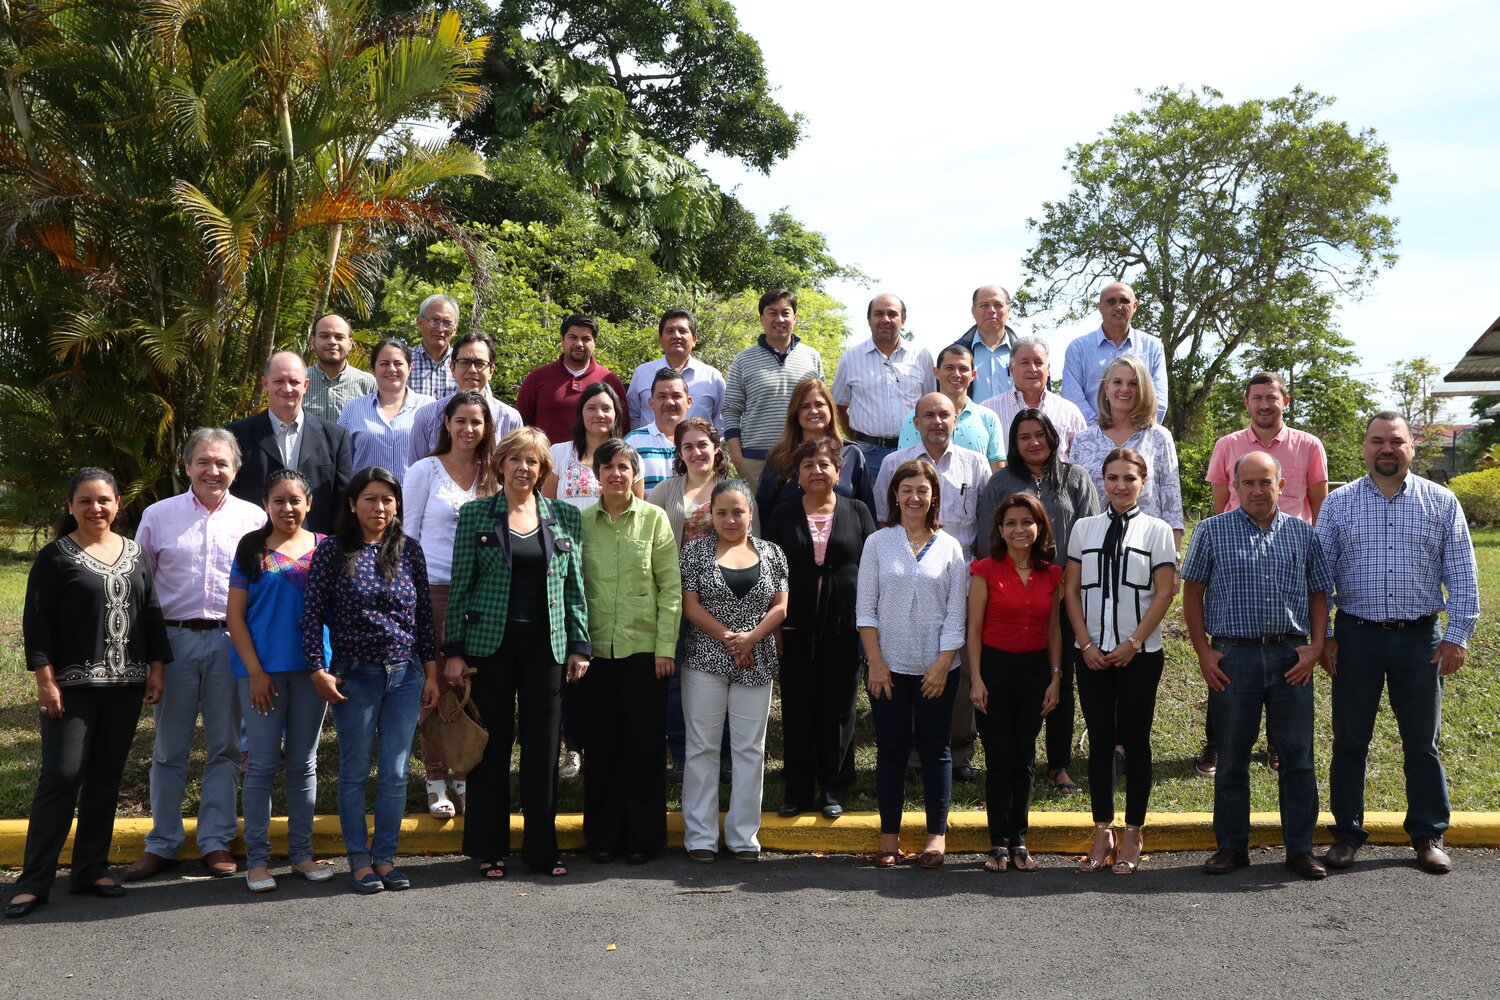 Representatives from 12 national genebanks from across the Americas came together at IICA’s Secretariat in San José, Costa Rica, where the Crop Trust held its most recent Genebank Operations and Advanced Learning (GOAL) workshop.